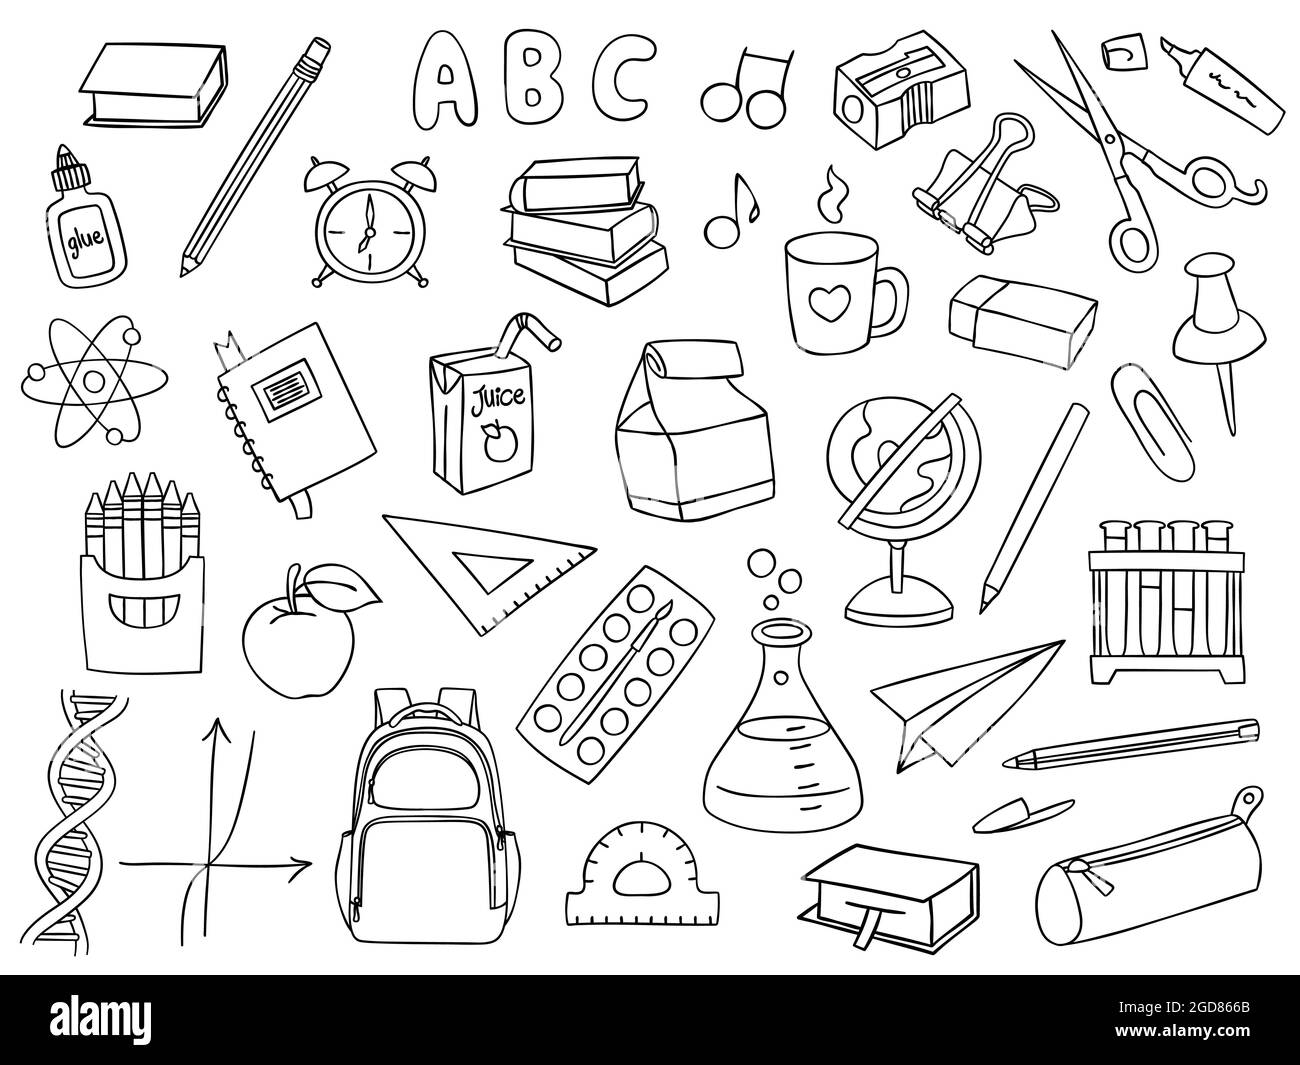 Collection of vector hand drawn illustrations of school related objects and items, back to school, first day of school. Black colored outline doodles. Stock Vector